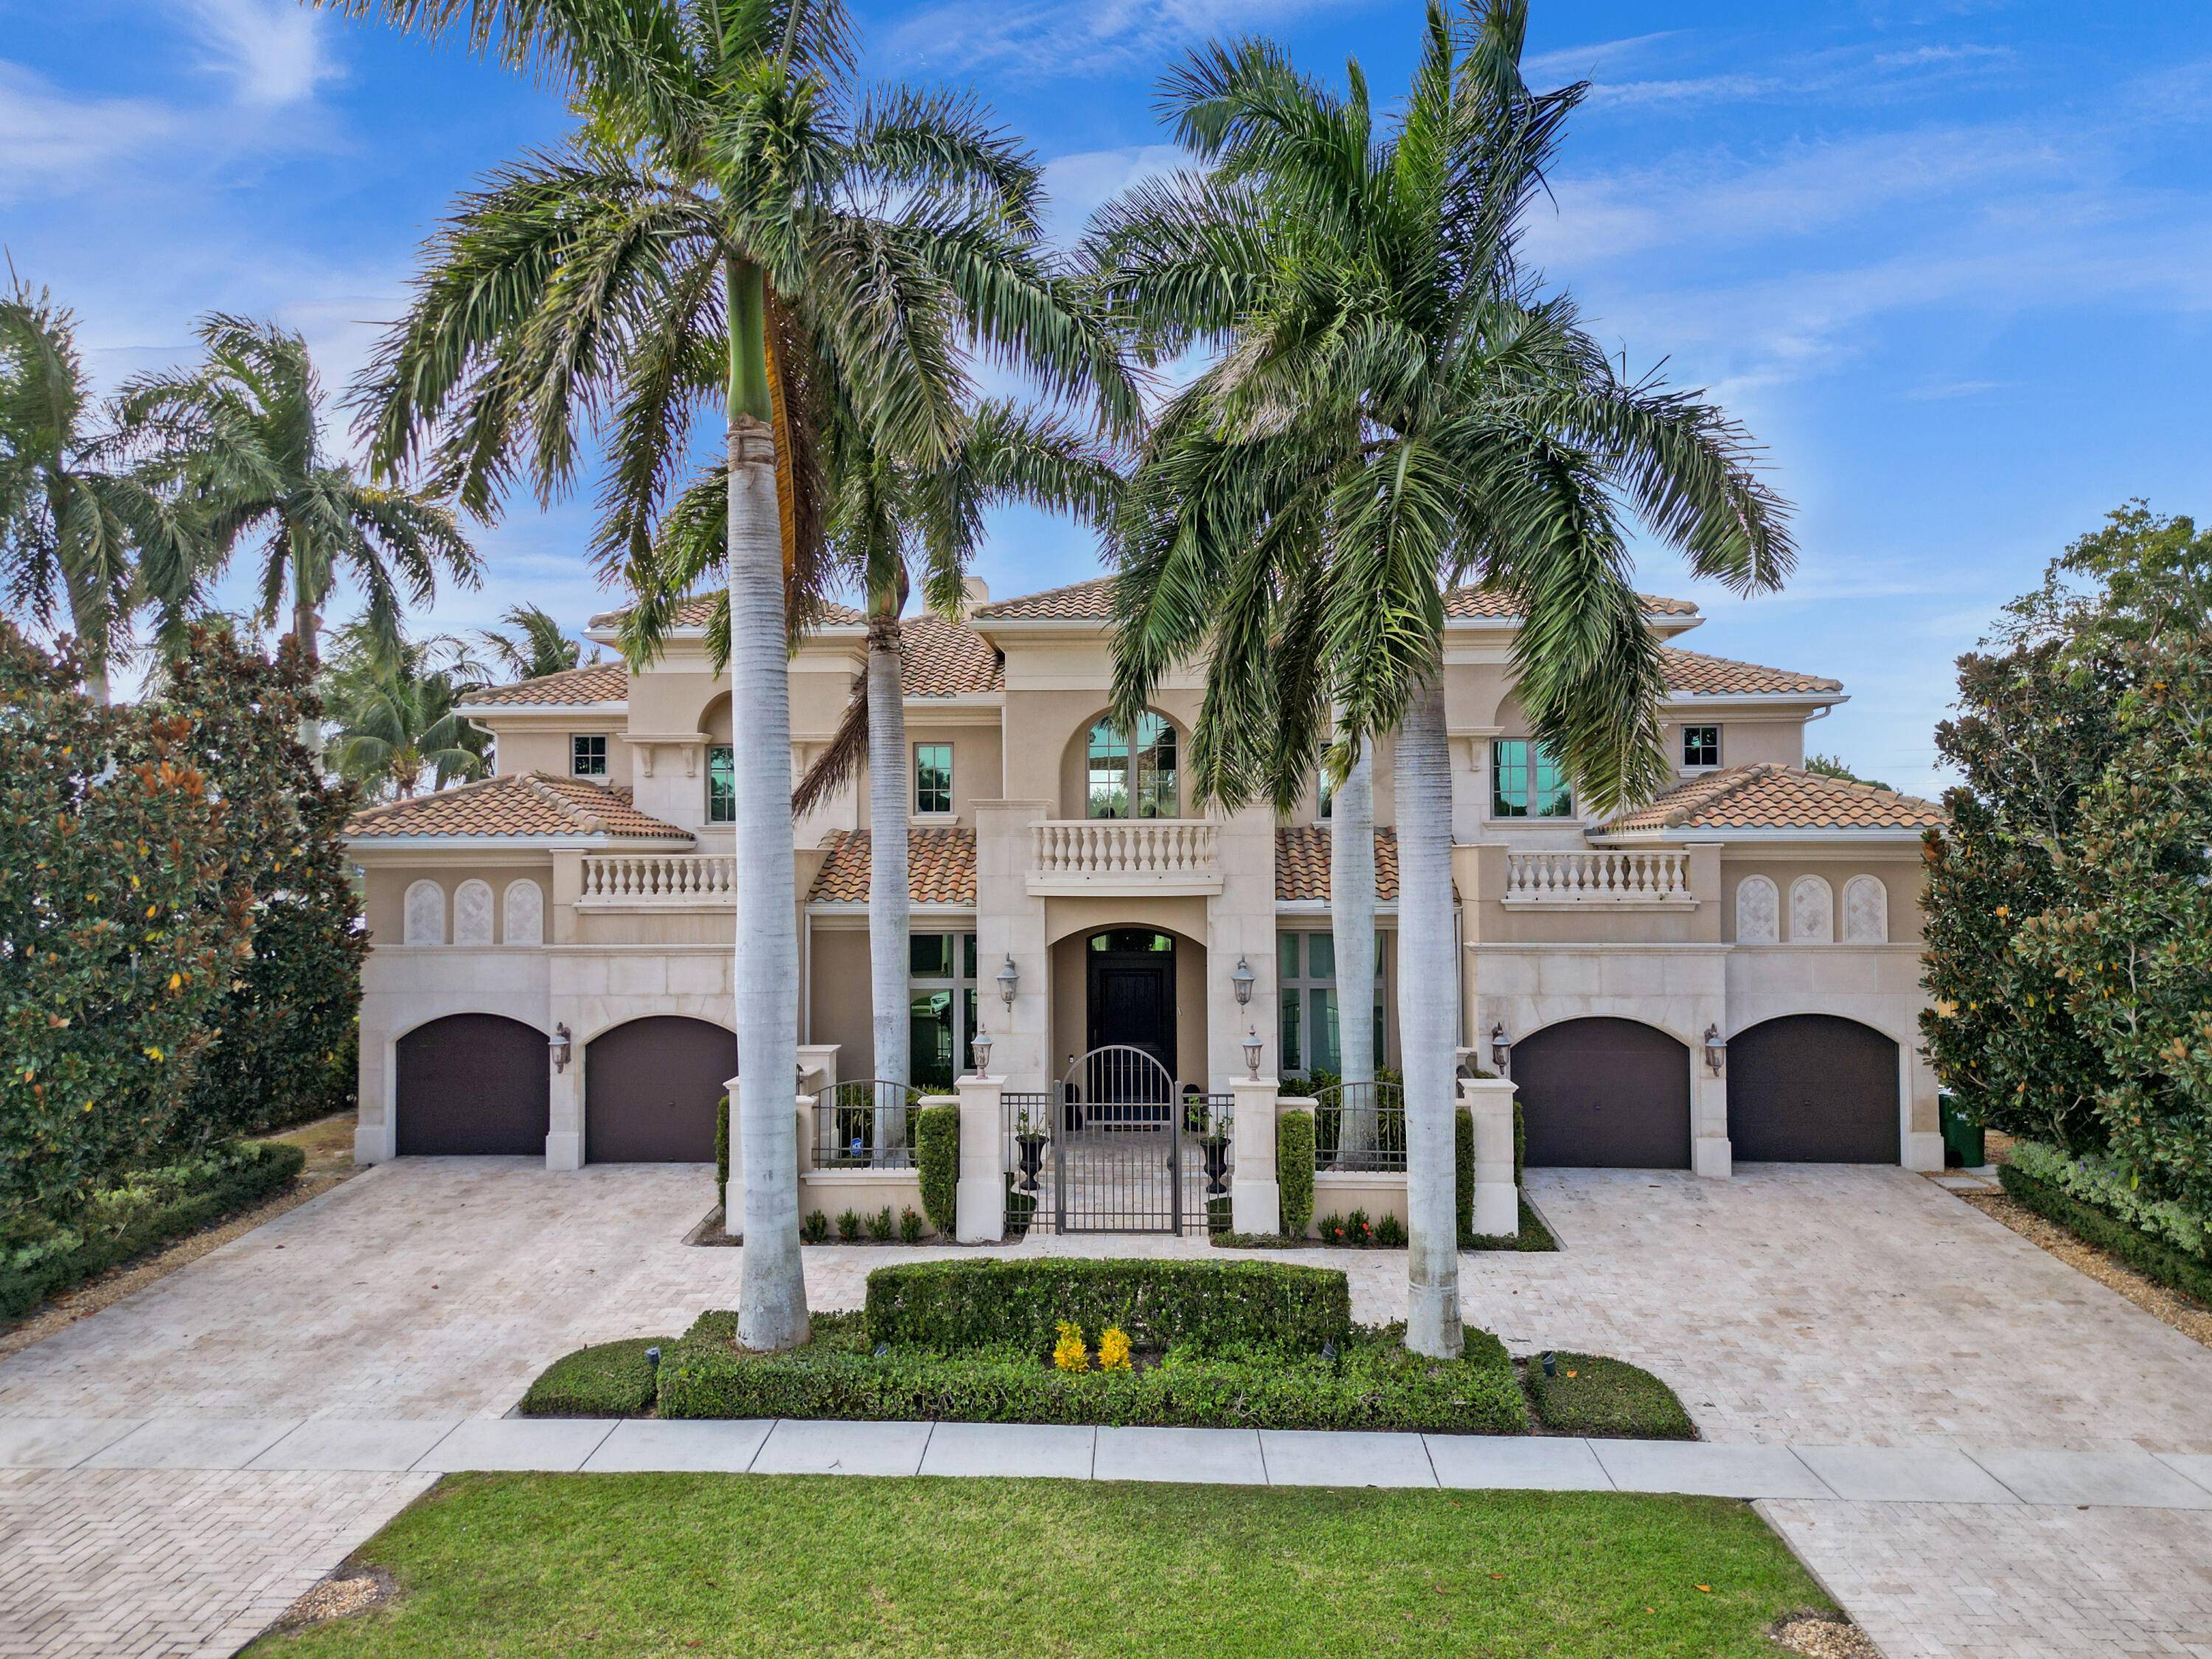 This custom built, luxurious estate home has direct views of the beautiful Delaire Country Club golf course.